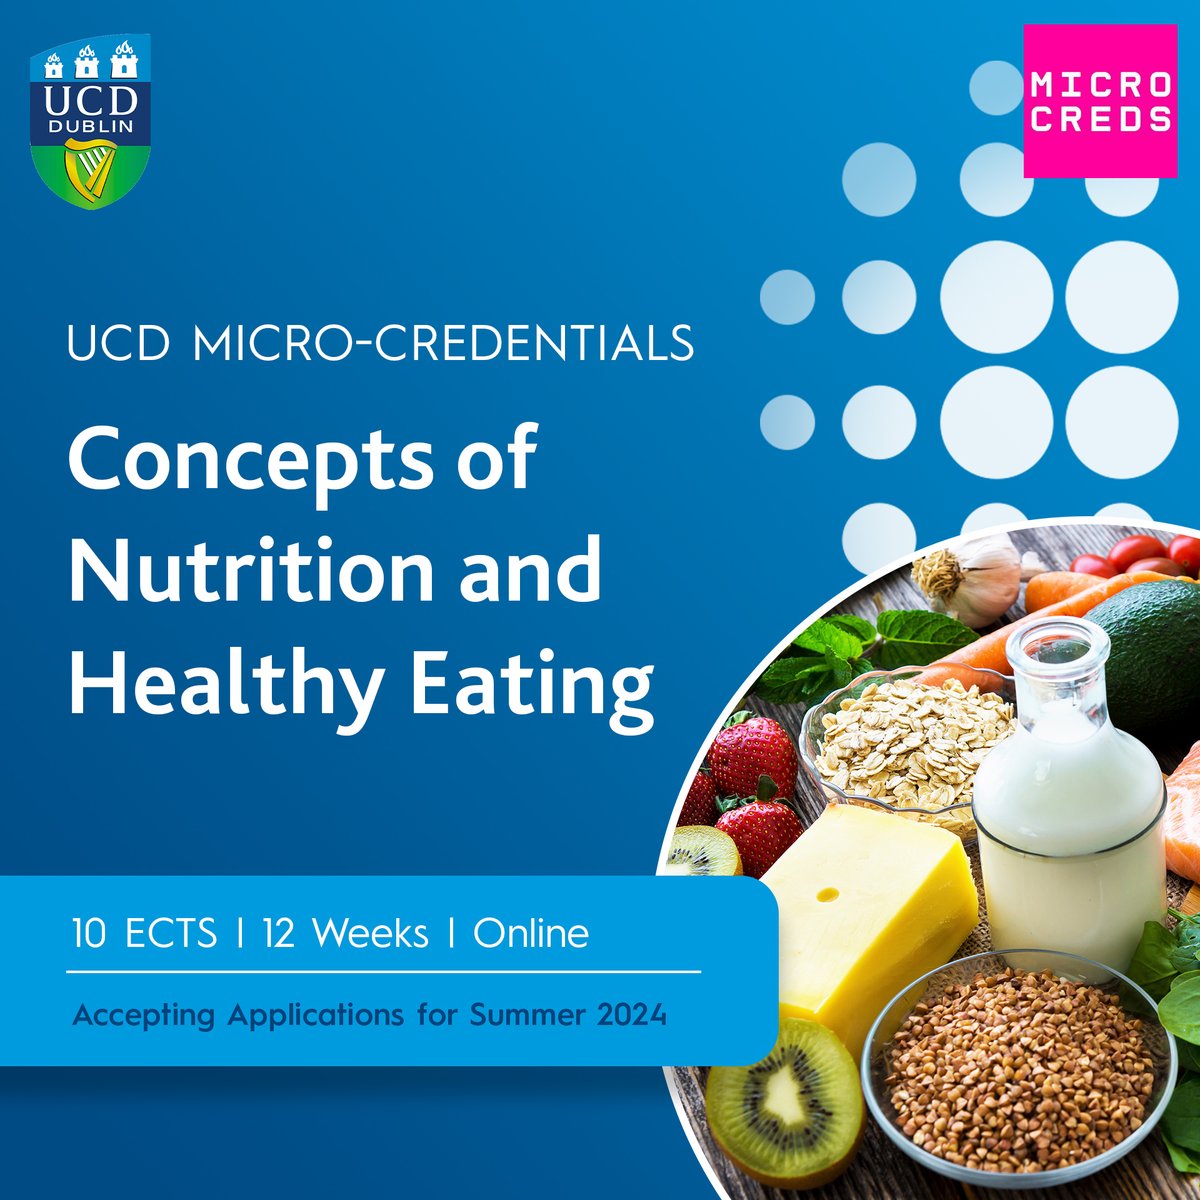 🥕Our Concepts of Nutrition and Healthy Eating #microcredential will provide learners with the knowledge to respond to the societal and consumer demand for nutritious, healthy, safe, and sustainable food. Apply ucd.ie/microcredentia… #UCD #food #foodindustry #nutrition